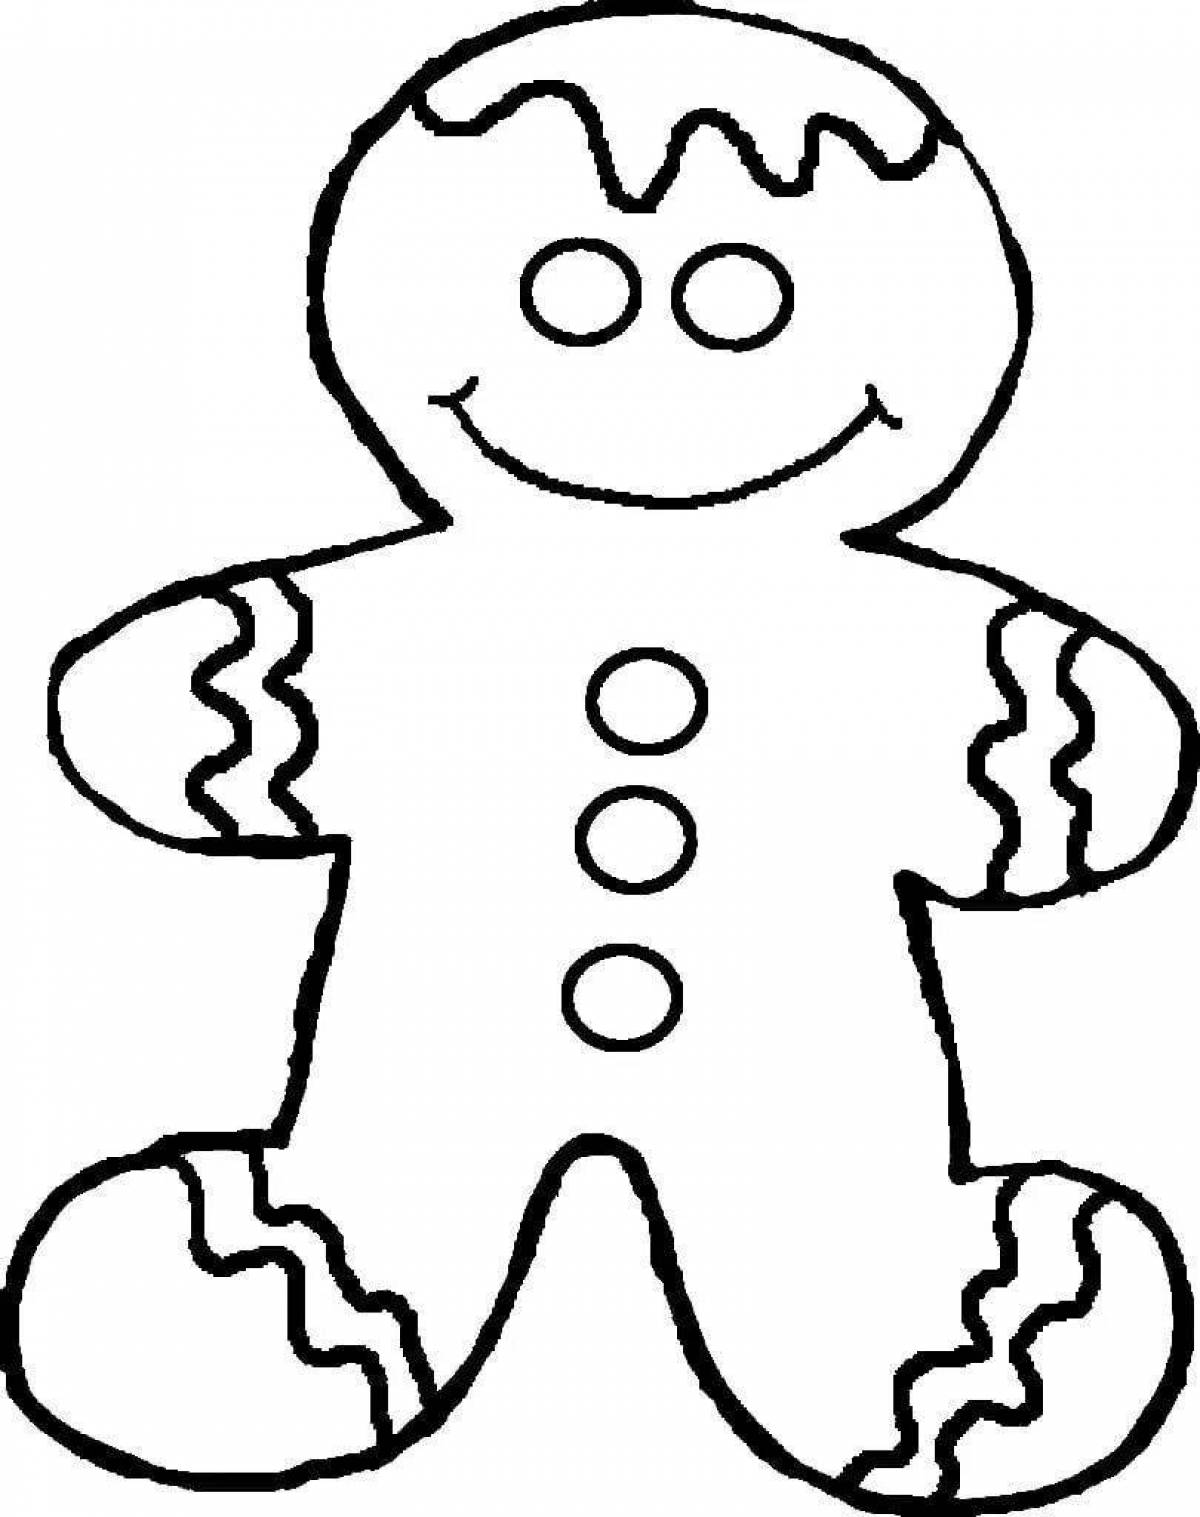 Coloring page happy gingerbread man